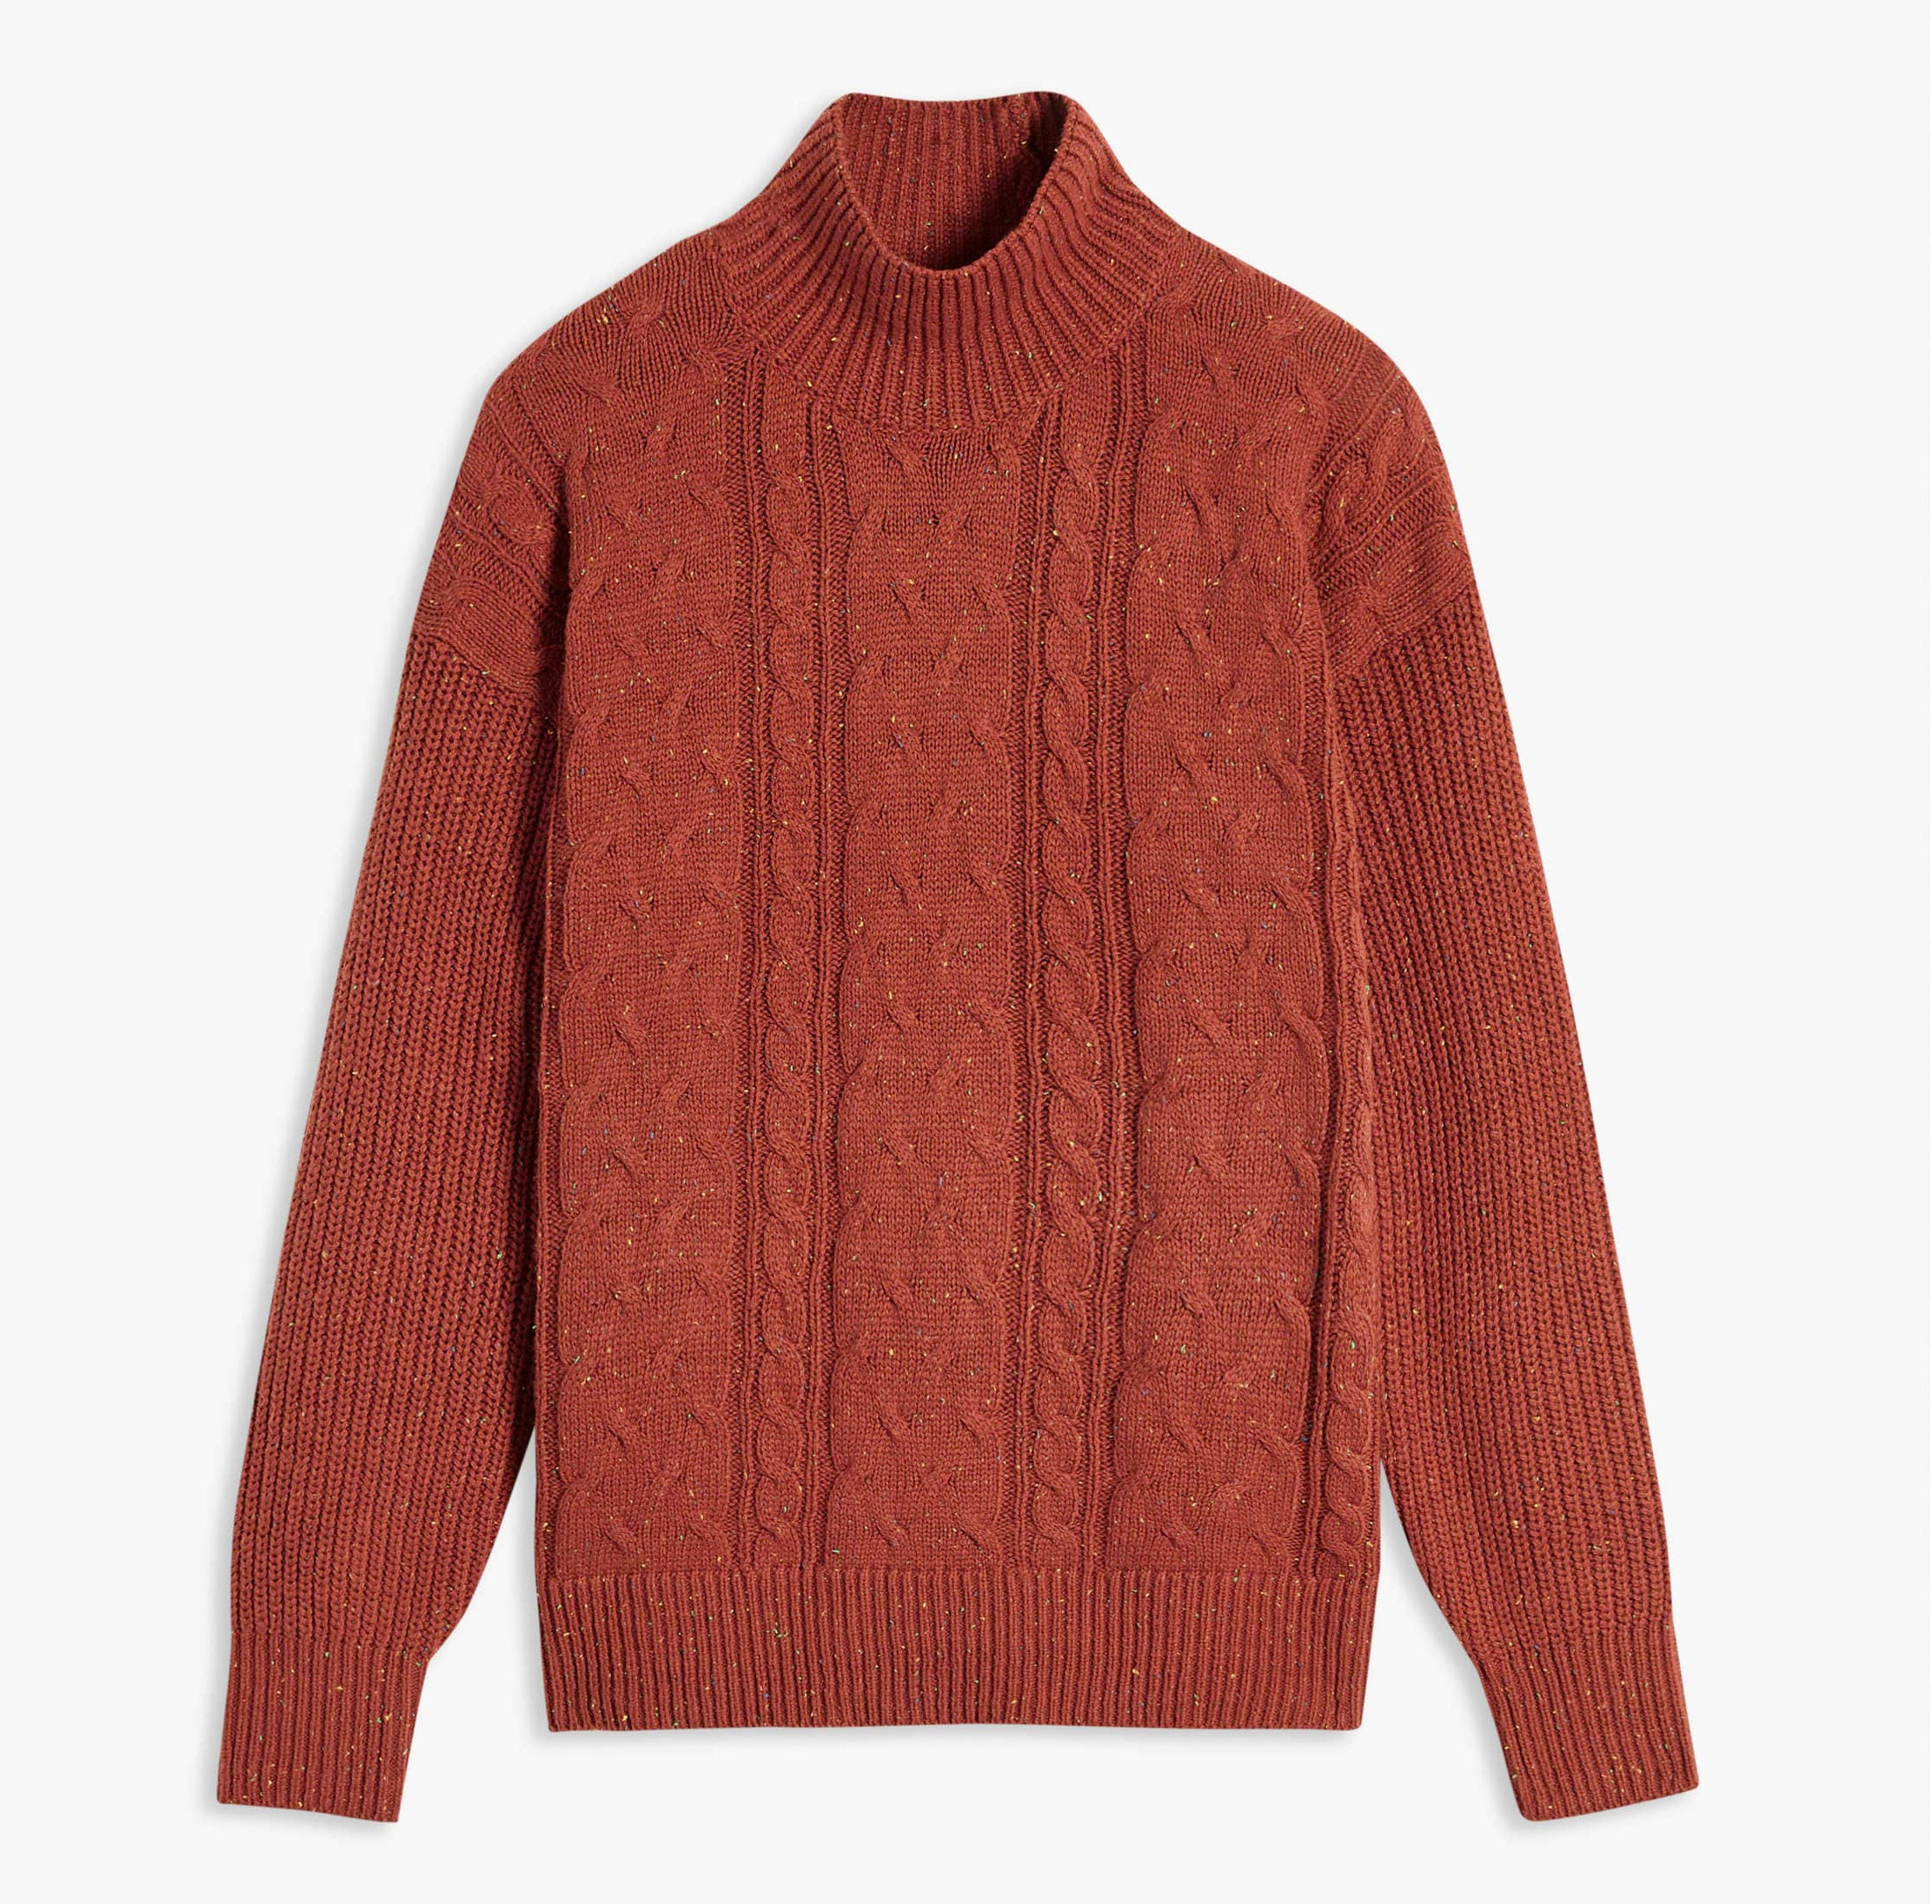 A red cable knite turtleneck sweater